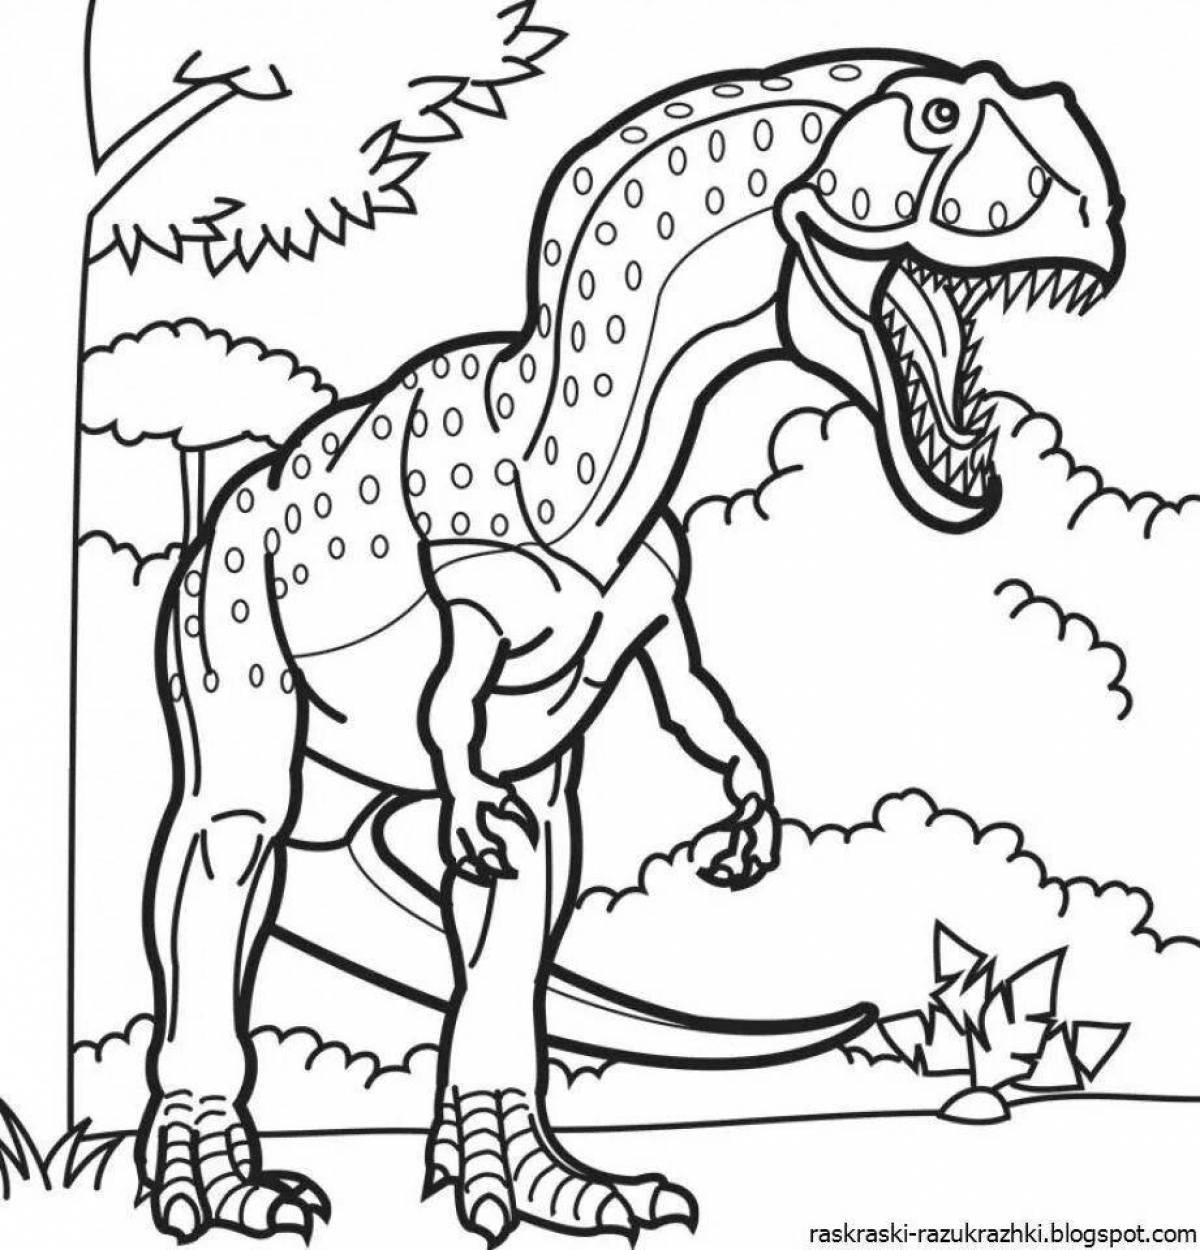 Fun dinosaur coloring book for boys 5-7 years old